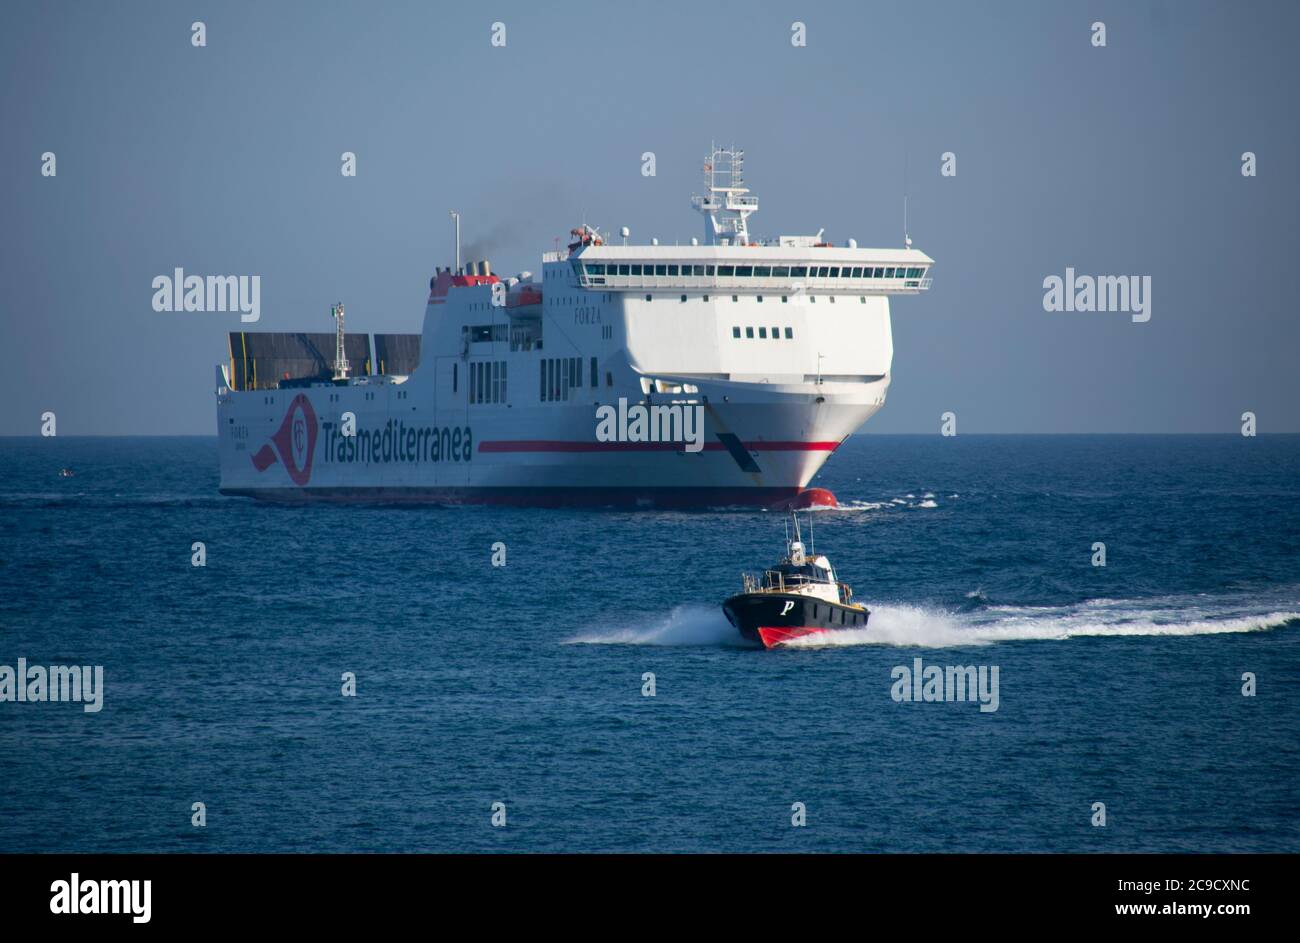 Forza ferry ship of the Trasmediterránea company entering the port of Barcelona preceded by the pilots boat. Stock Photo